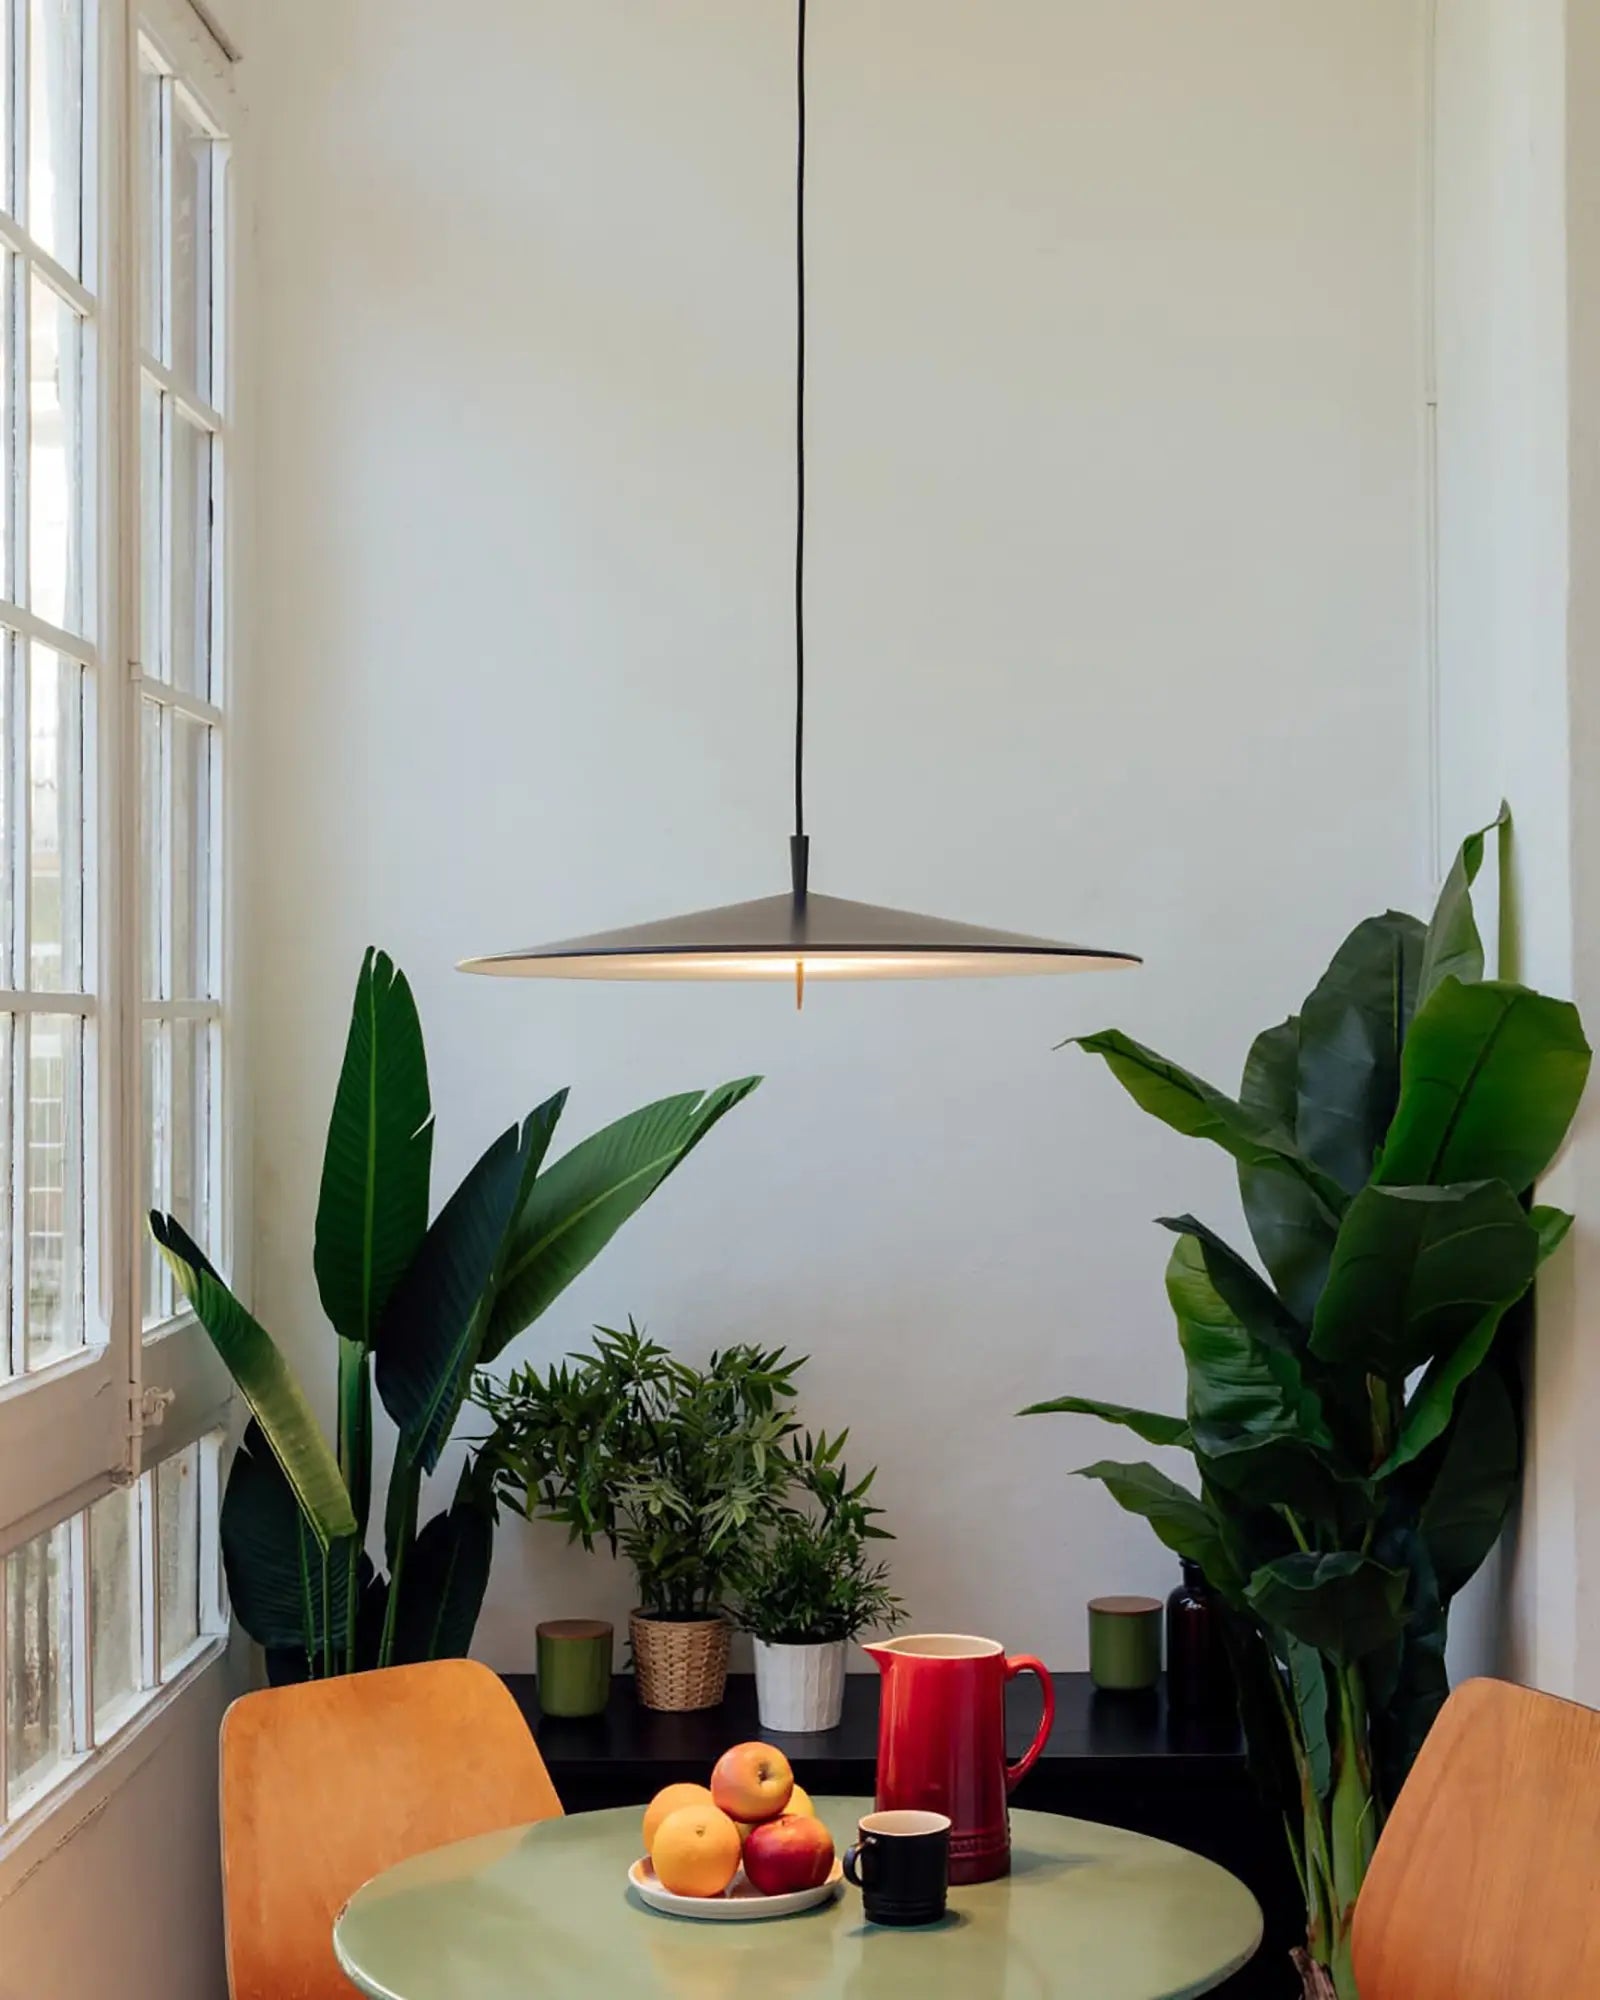 Pla modern flat dome pendant light above a dining table